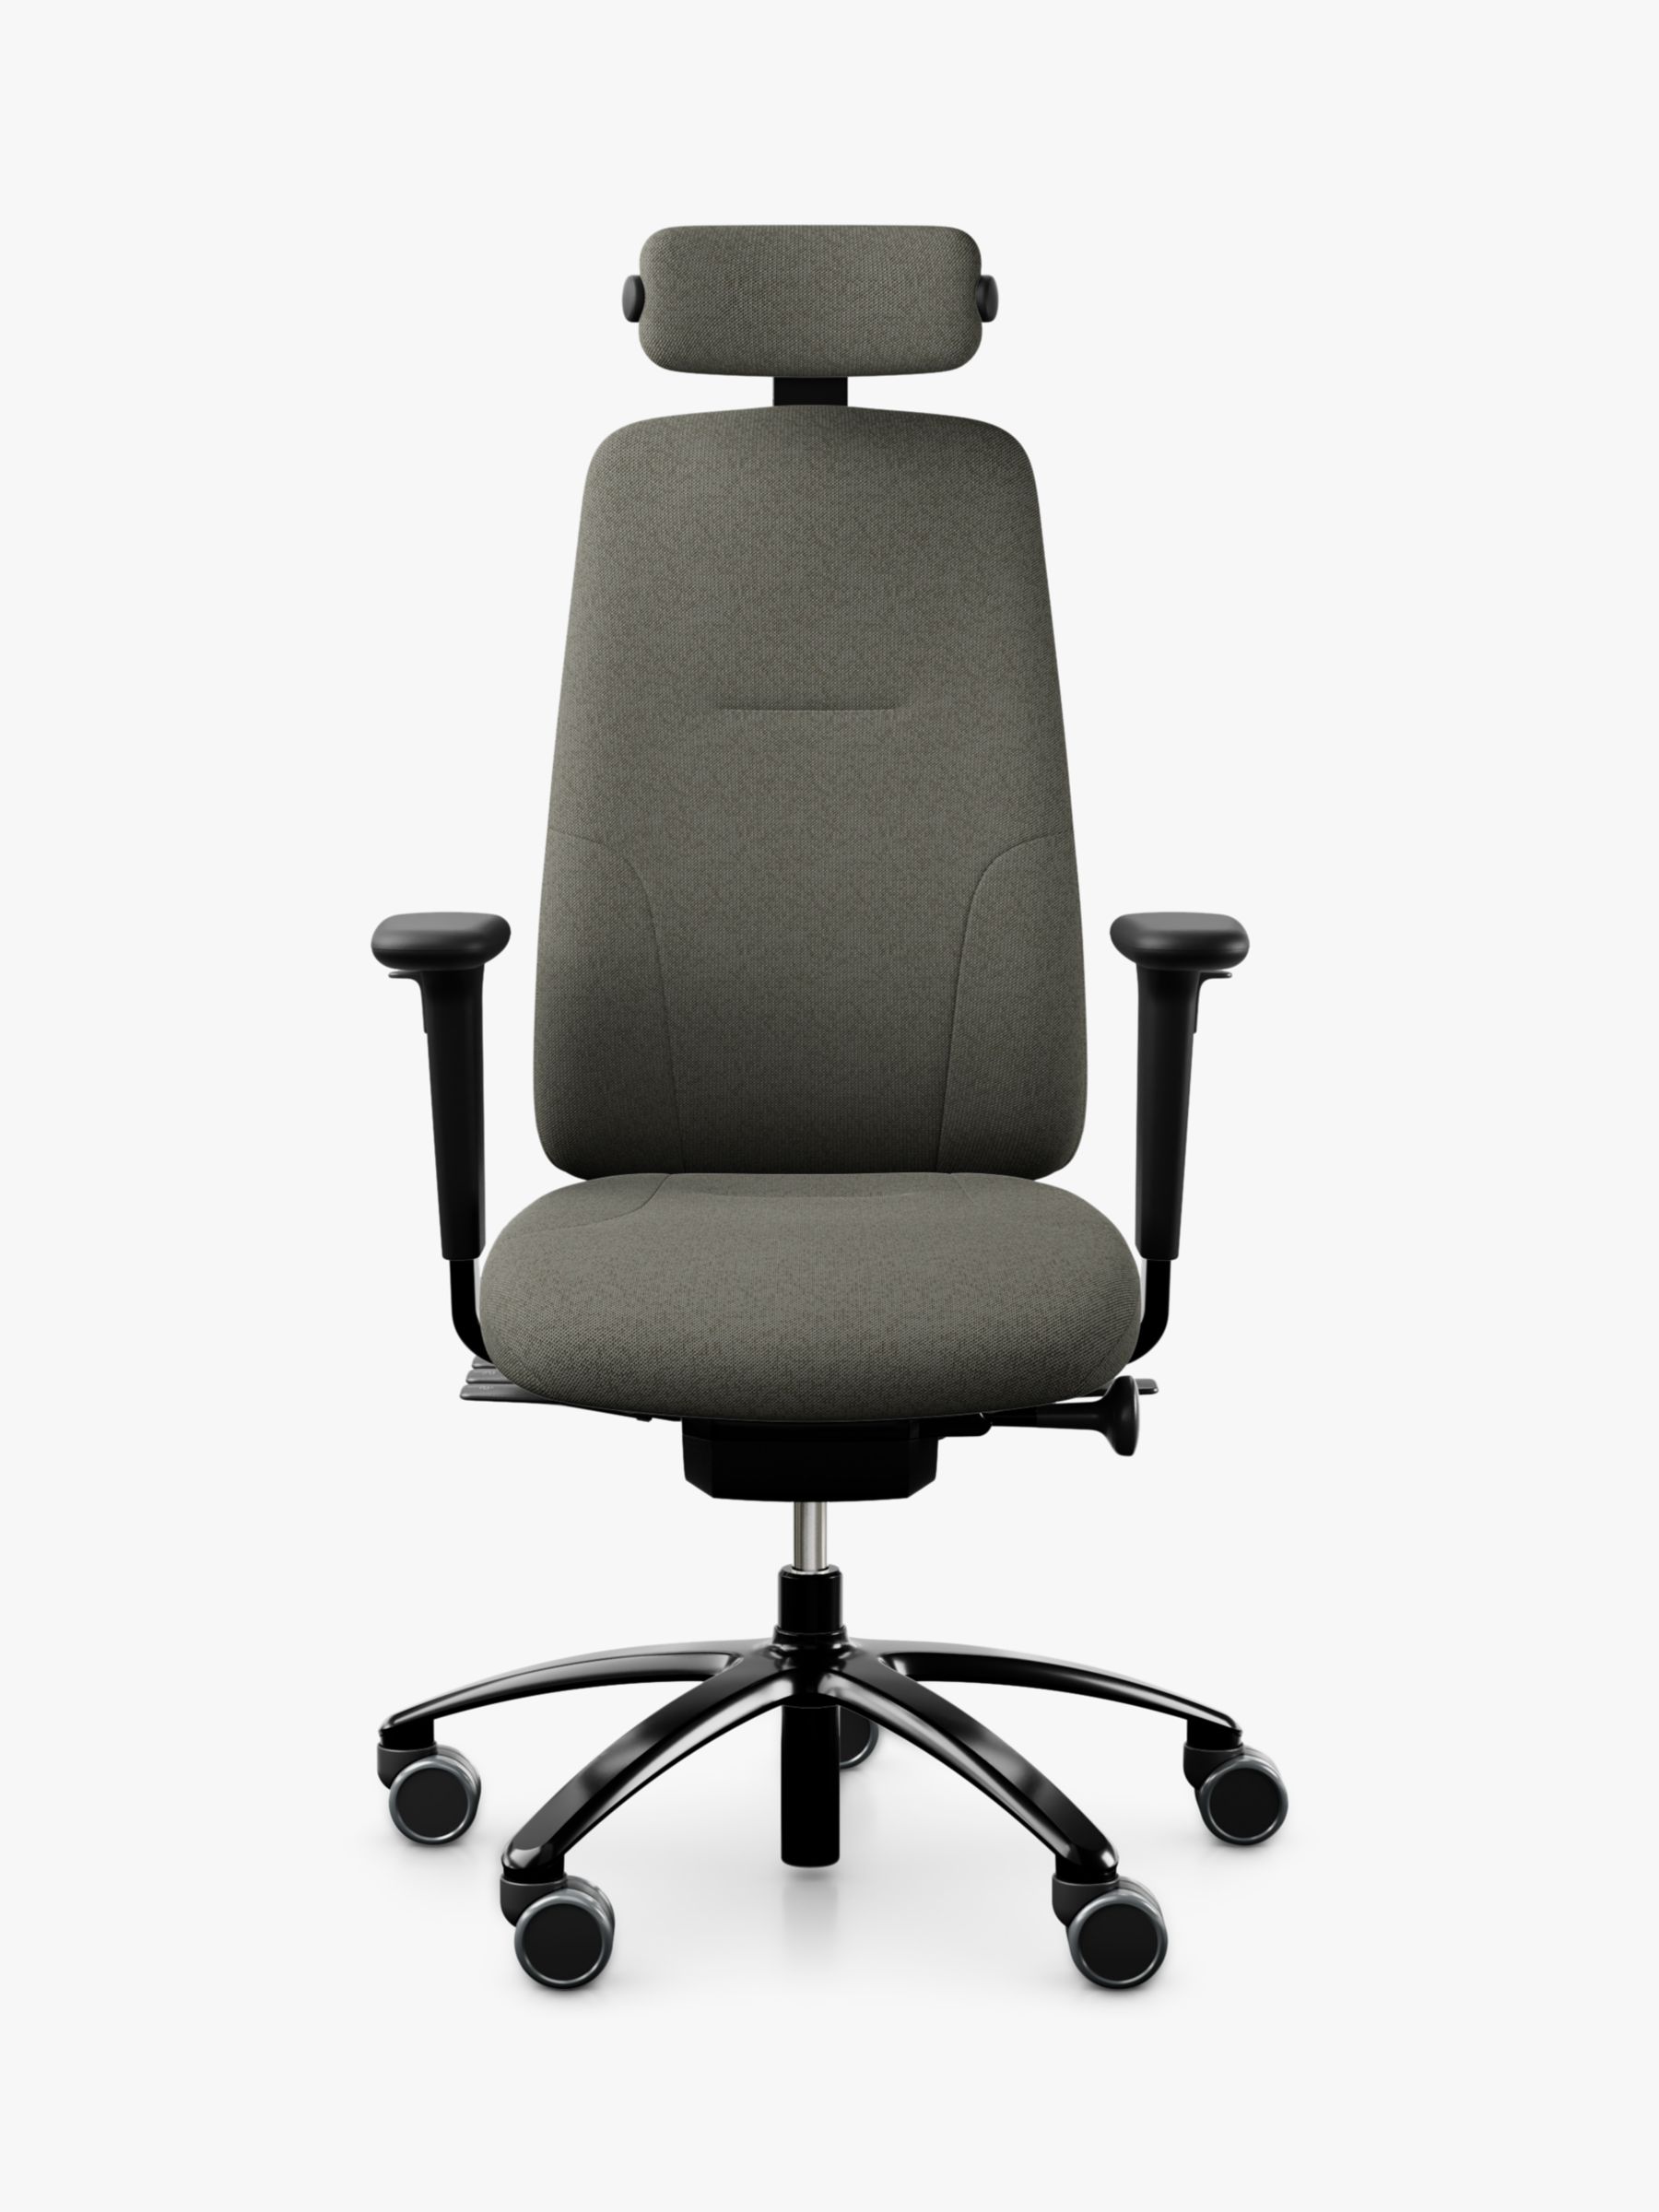 Photo of Rh new logic 220 uphostered office chair